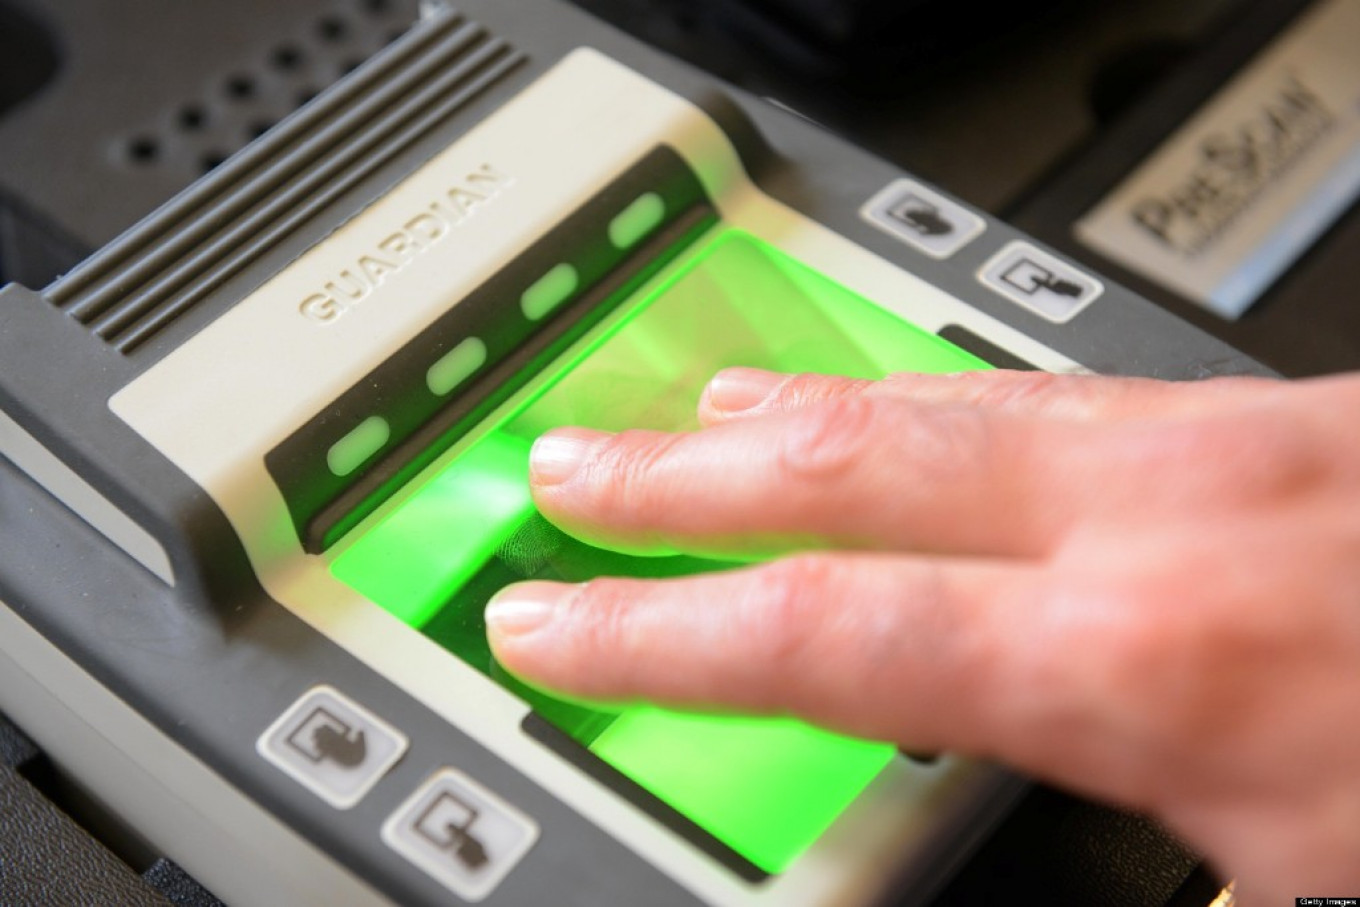 Russia Moves to Require Visitors to Submit Fingerprints